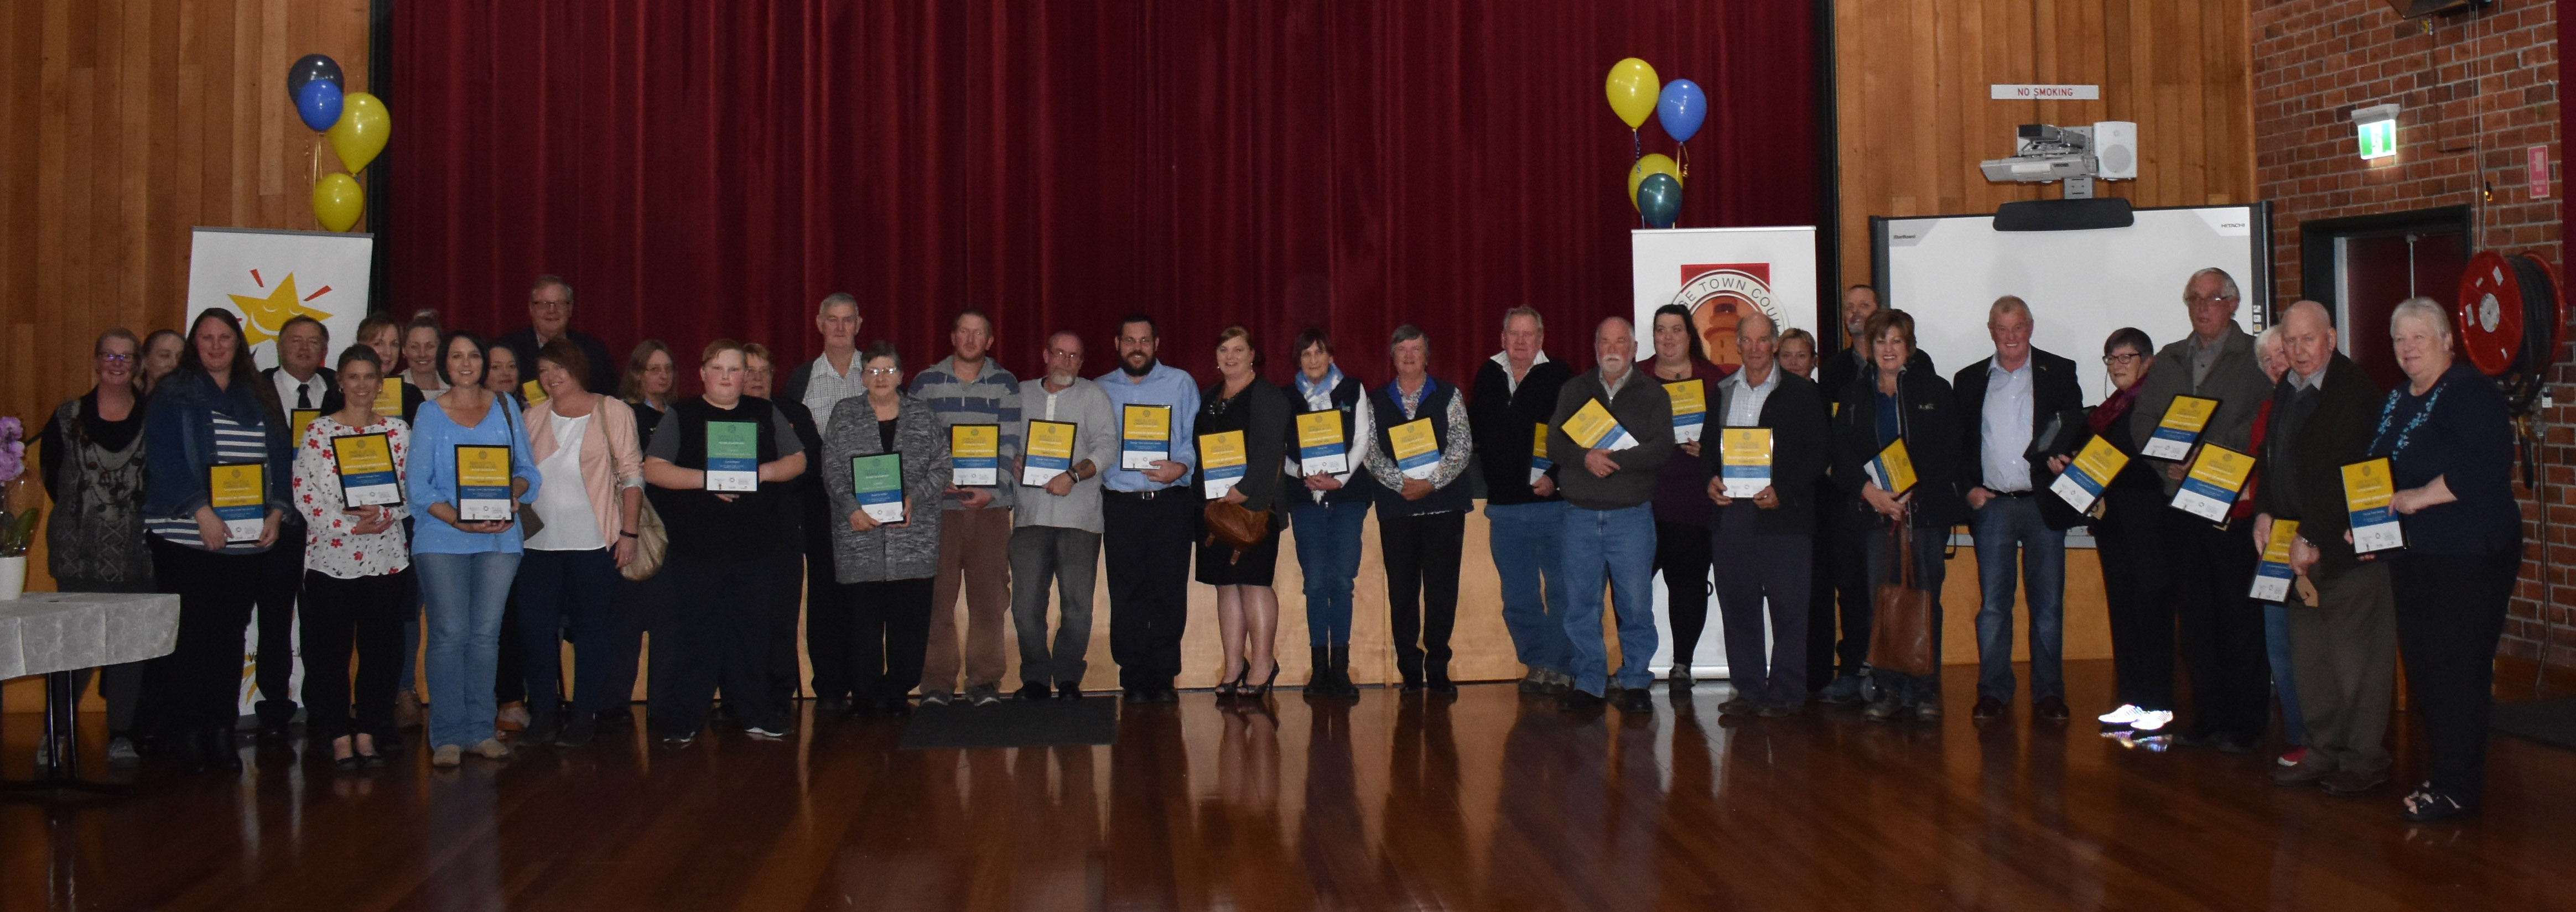 2018 Volunteer of the Year Recognition Function image